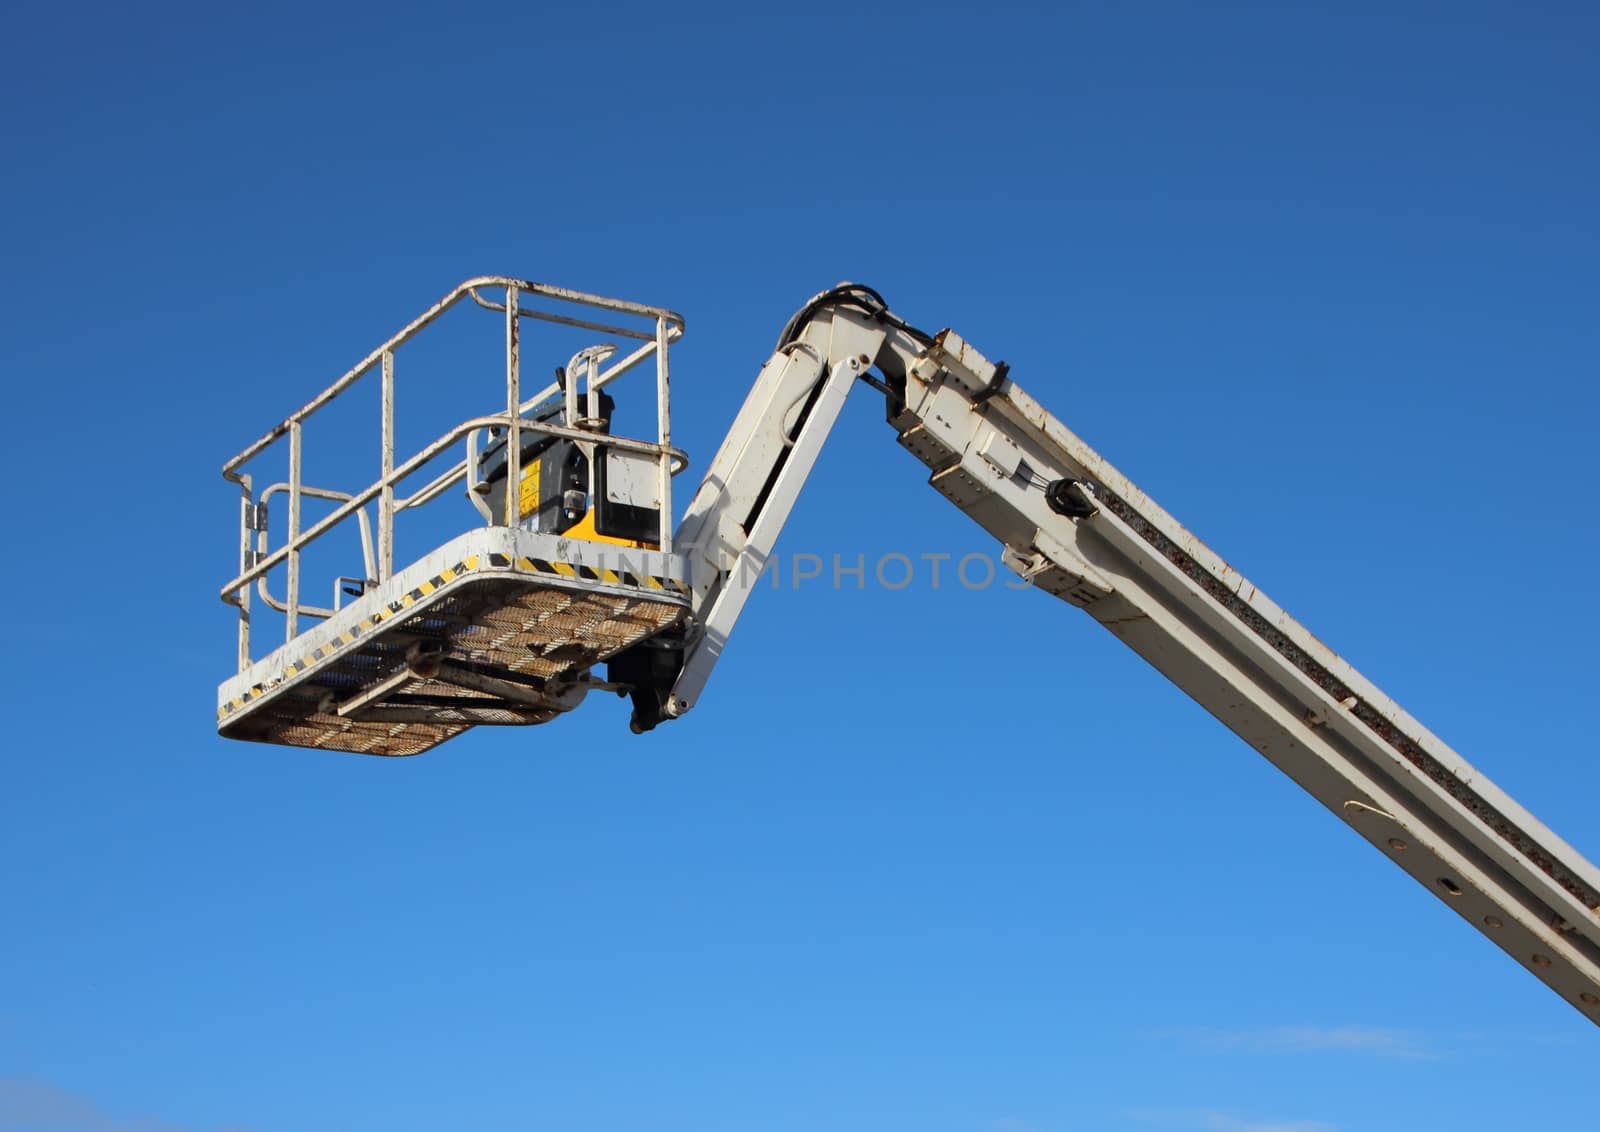 Mobile Industrial Crane Lift Basket Isolated on Blue Sky Background